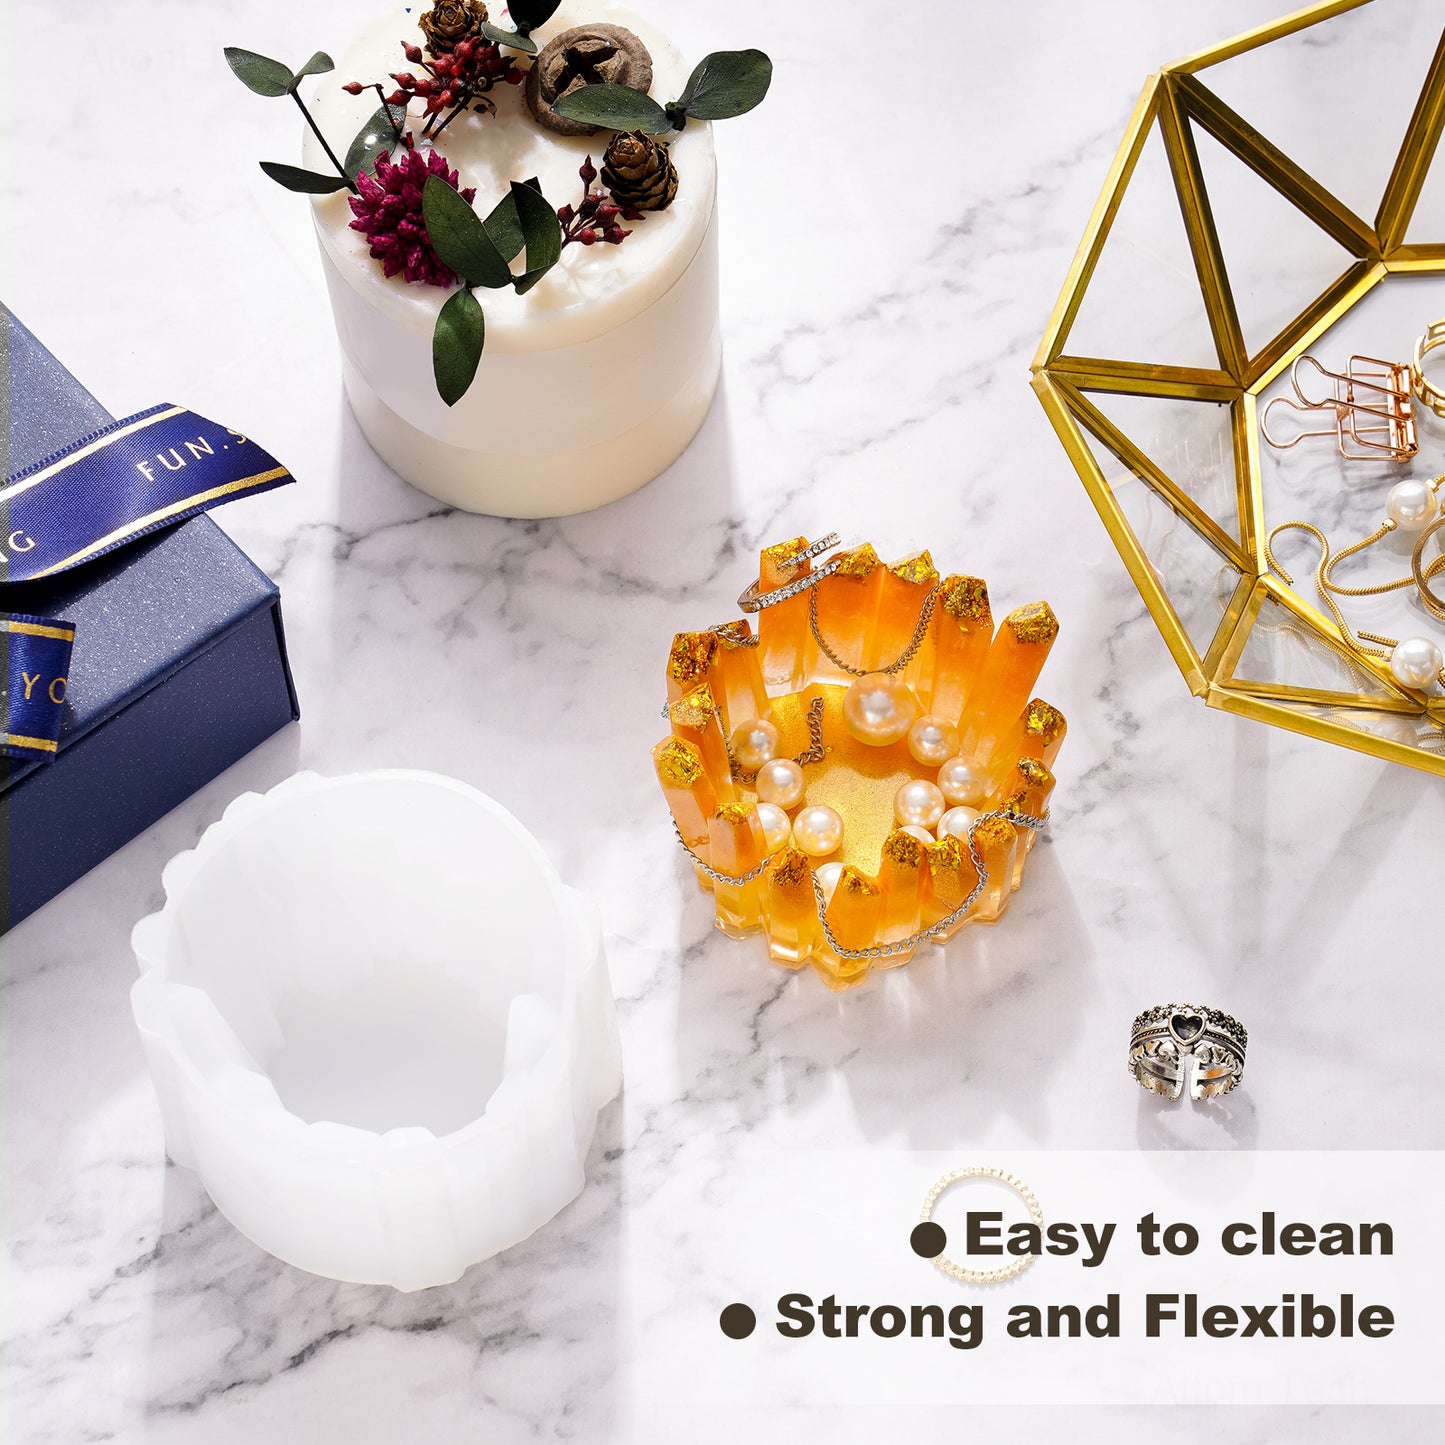 Crystal Shape Candle Holder Resin Silicone Mold+10 White Tealight Candles+Glit